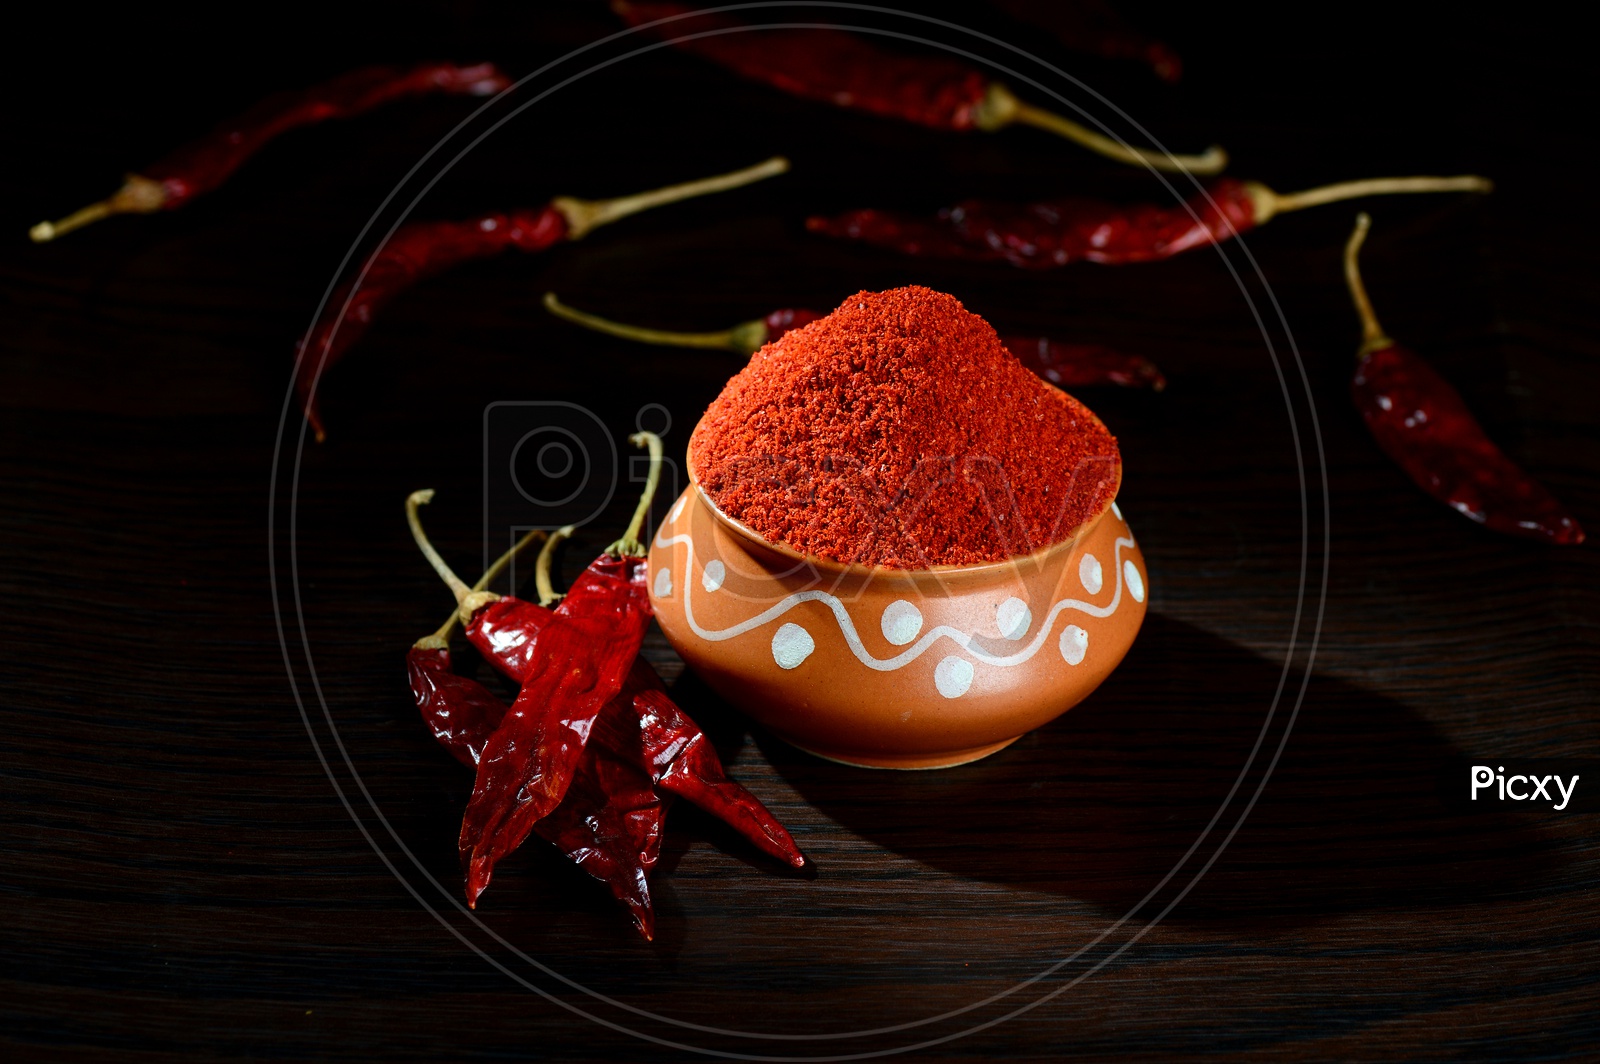 chilly powder in clay pot with red chilly, dried chillies on wooden background